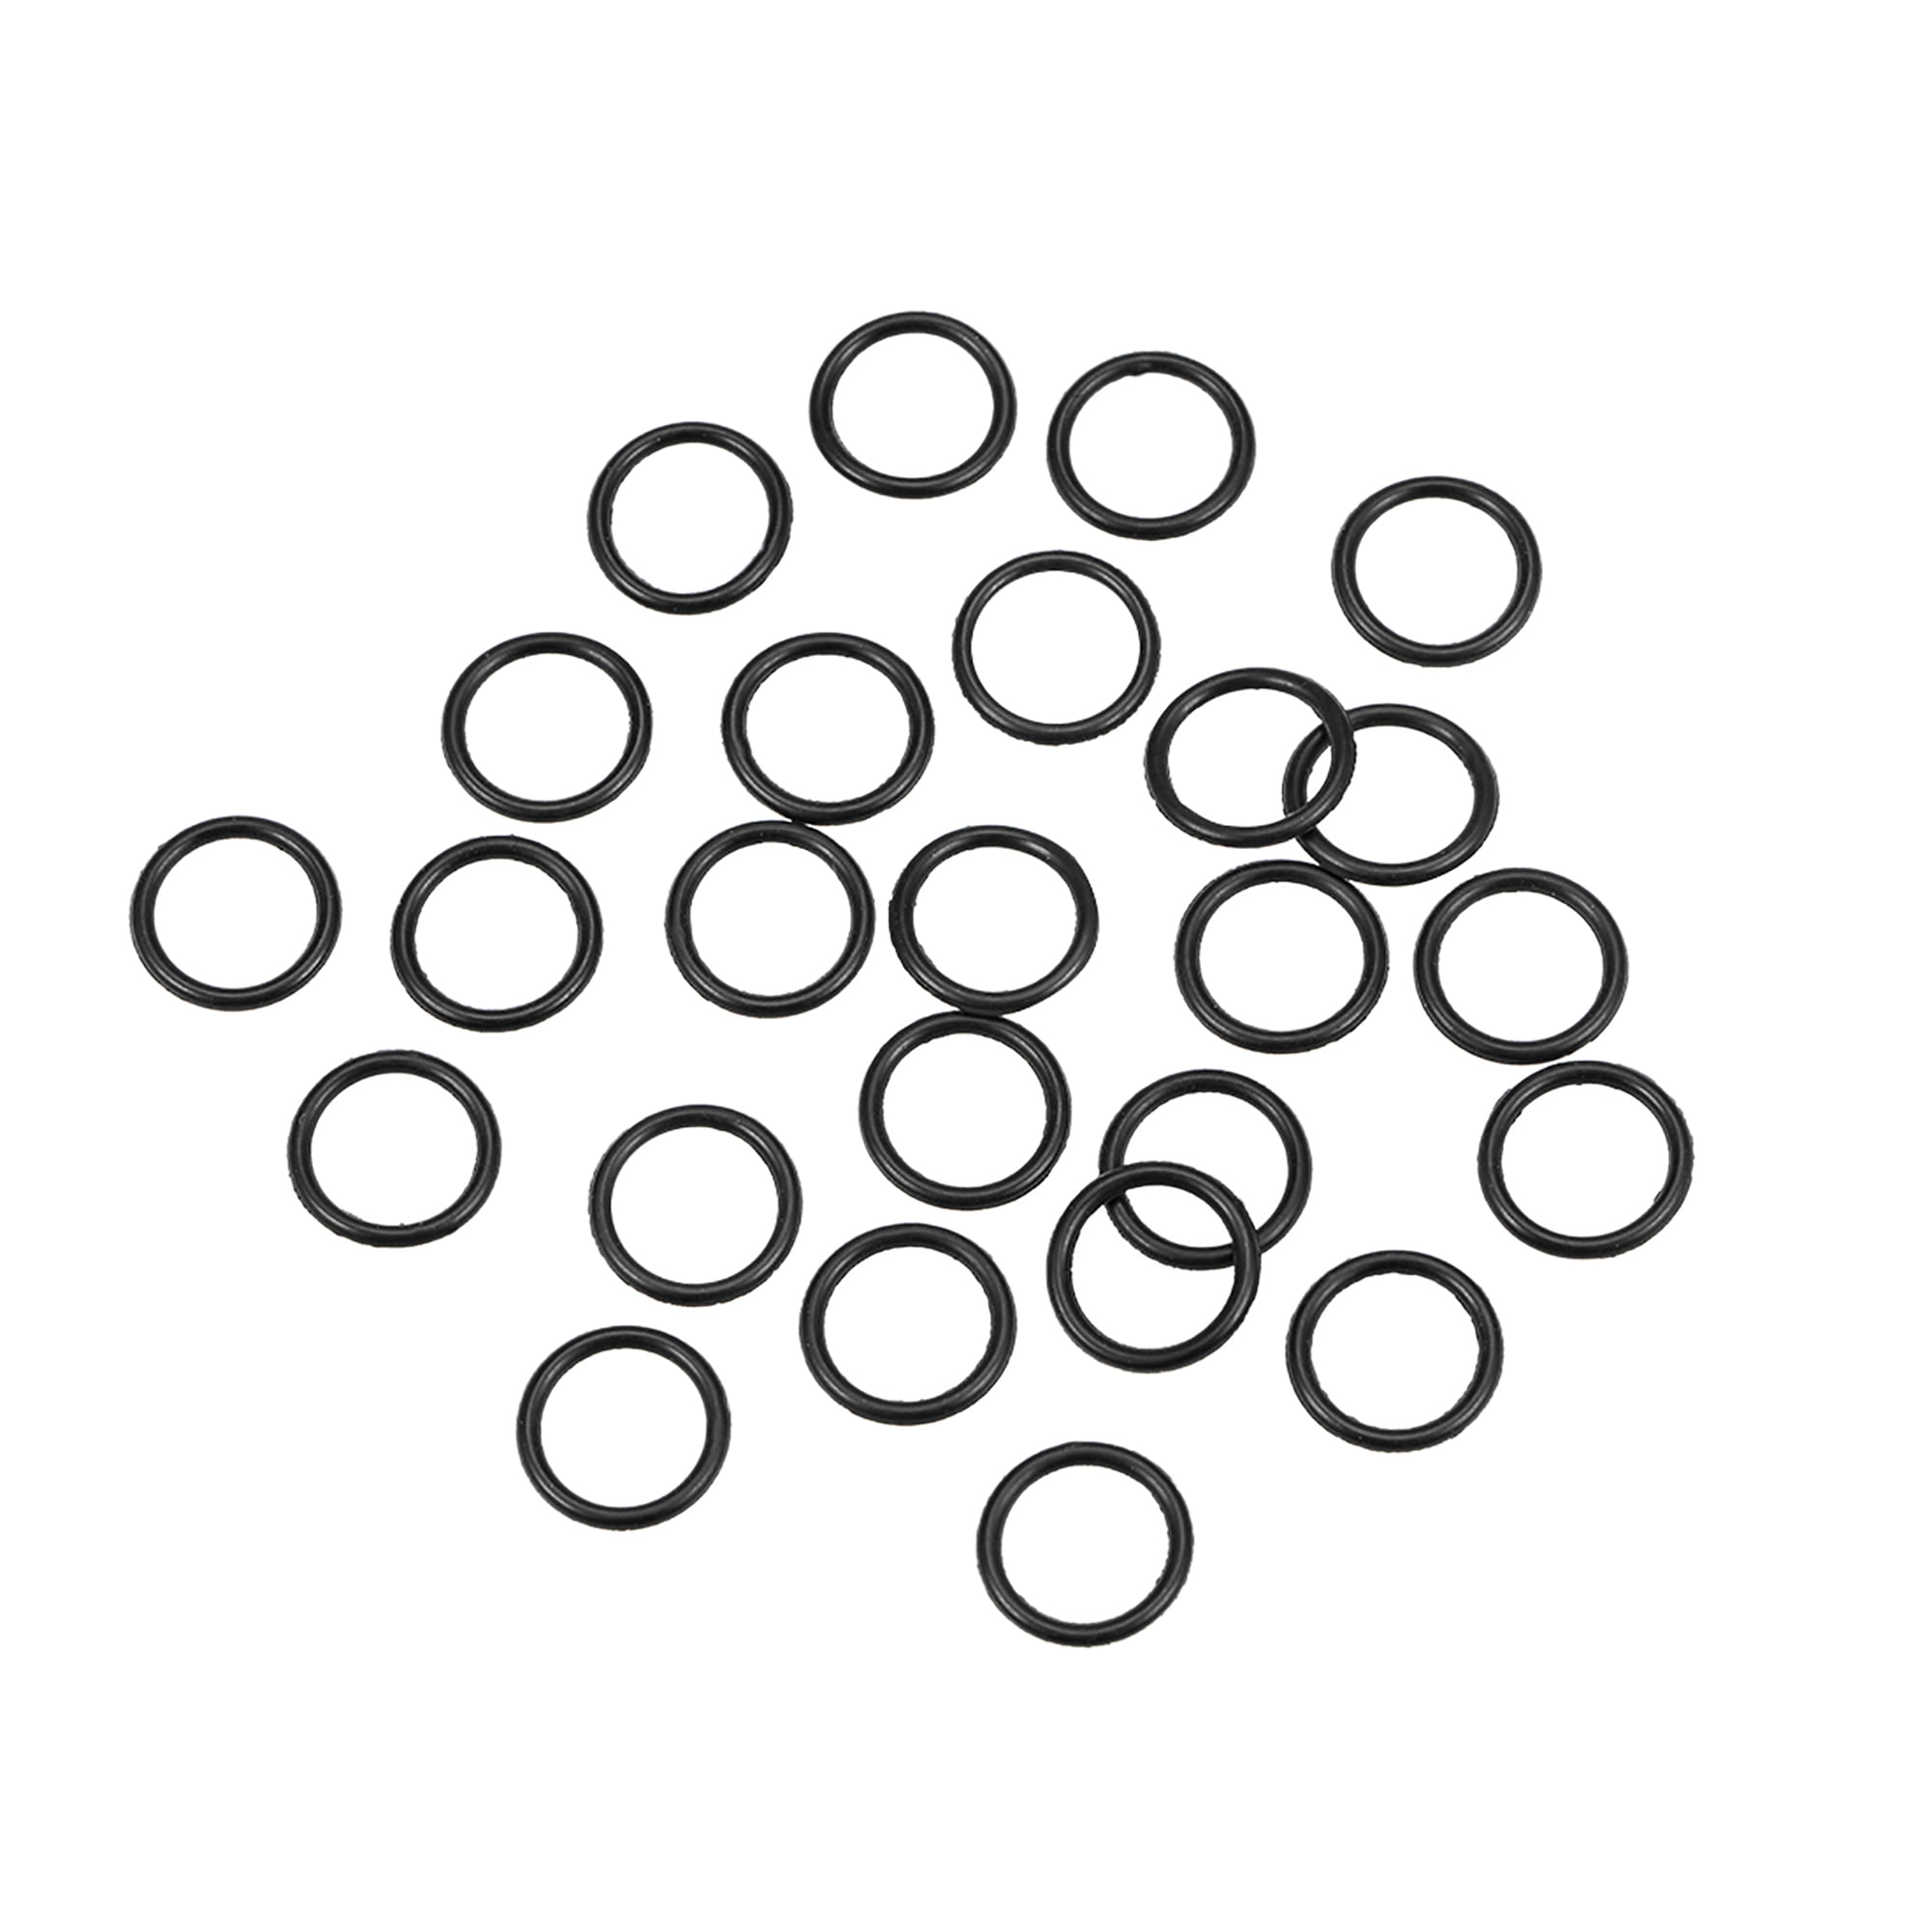 O-Rings Nitrile Rubber 1.8mm x 3.8mm x 1mm Round Seal Gasket 50 Pcs